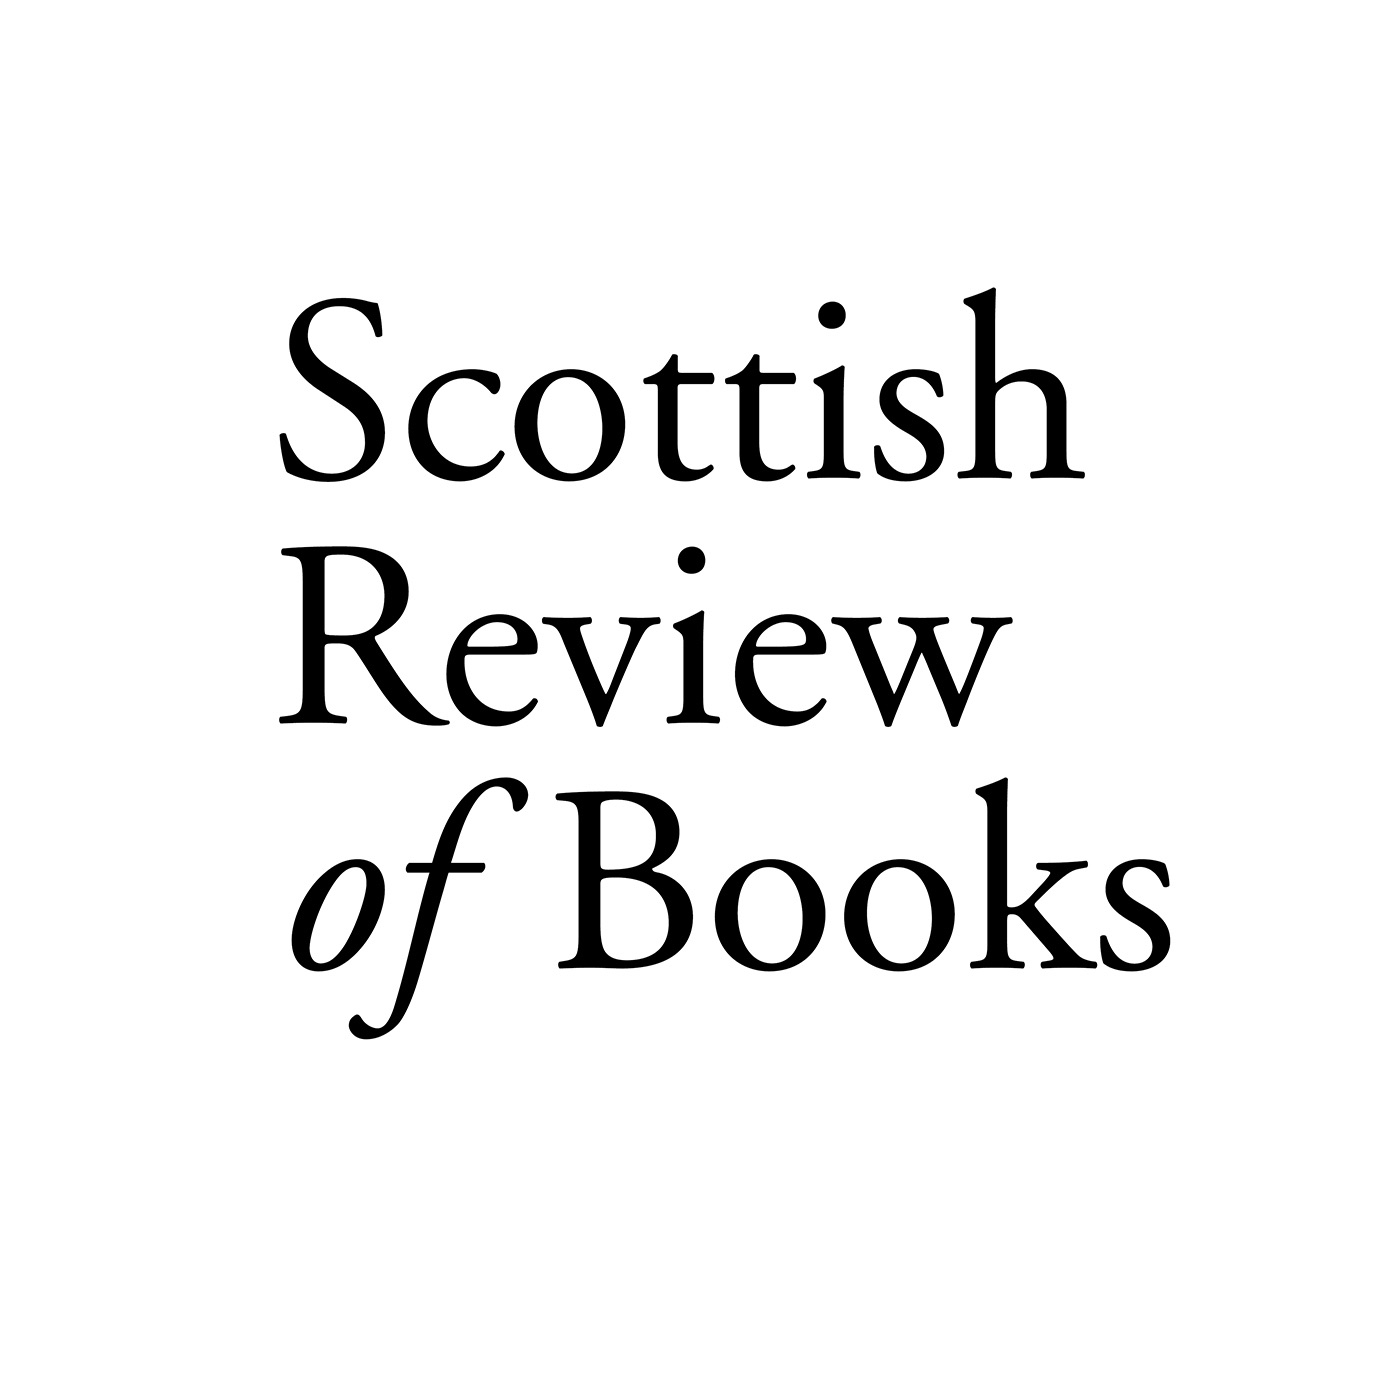 Scottish Review of Books